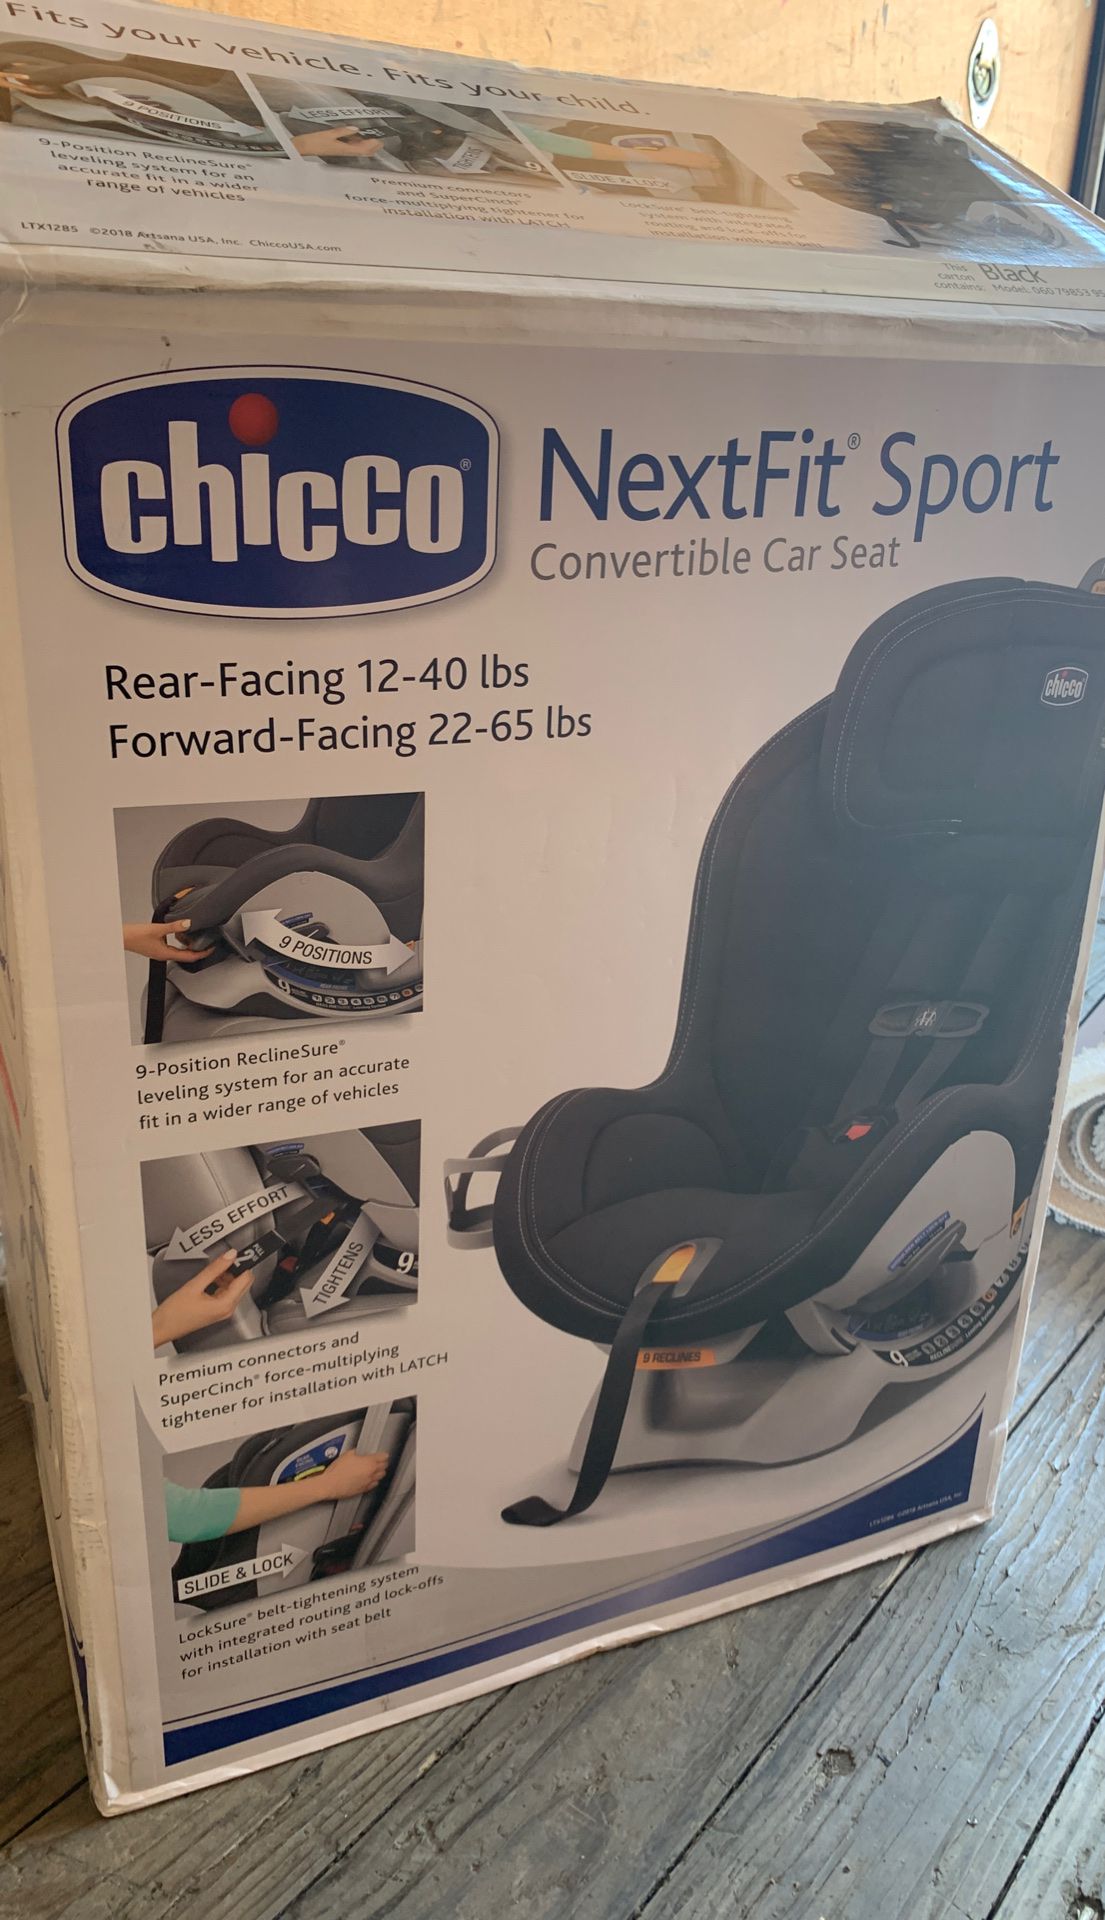 Chicco NextFit Sport Car Seat